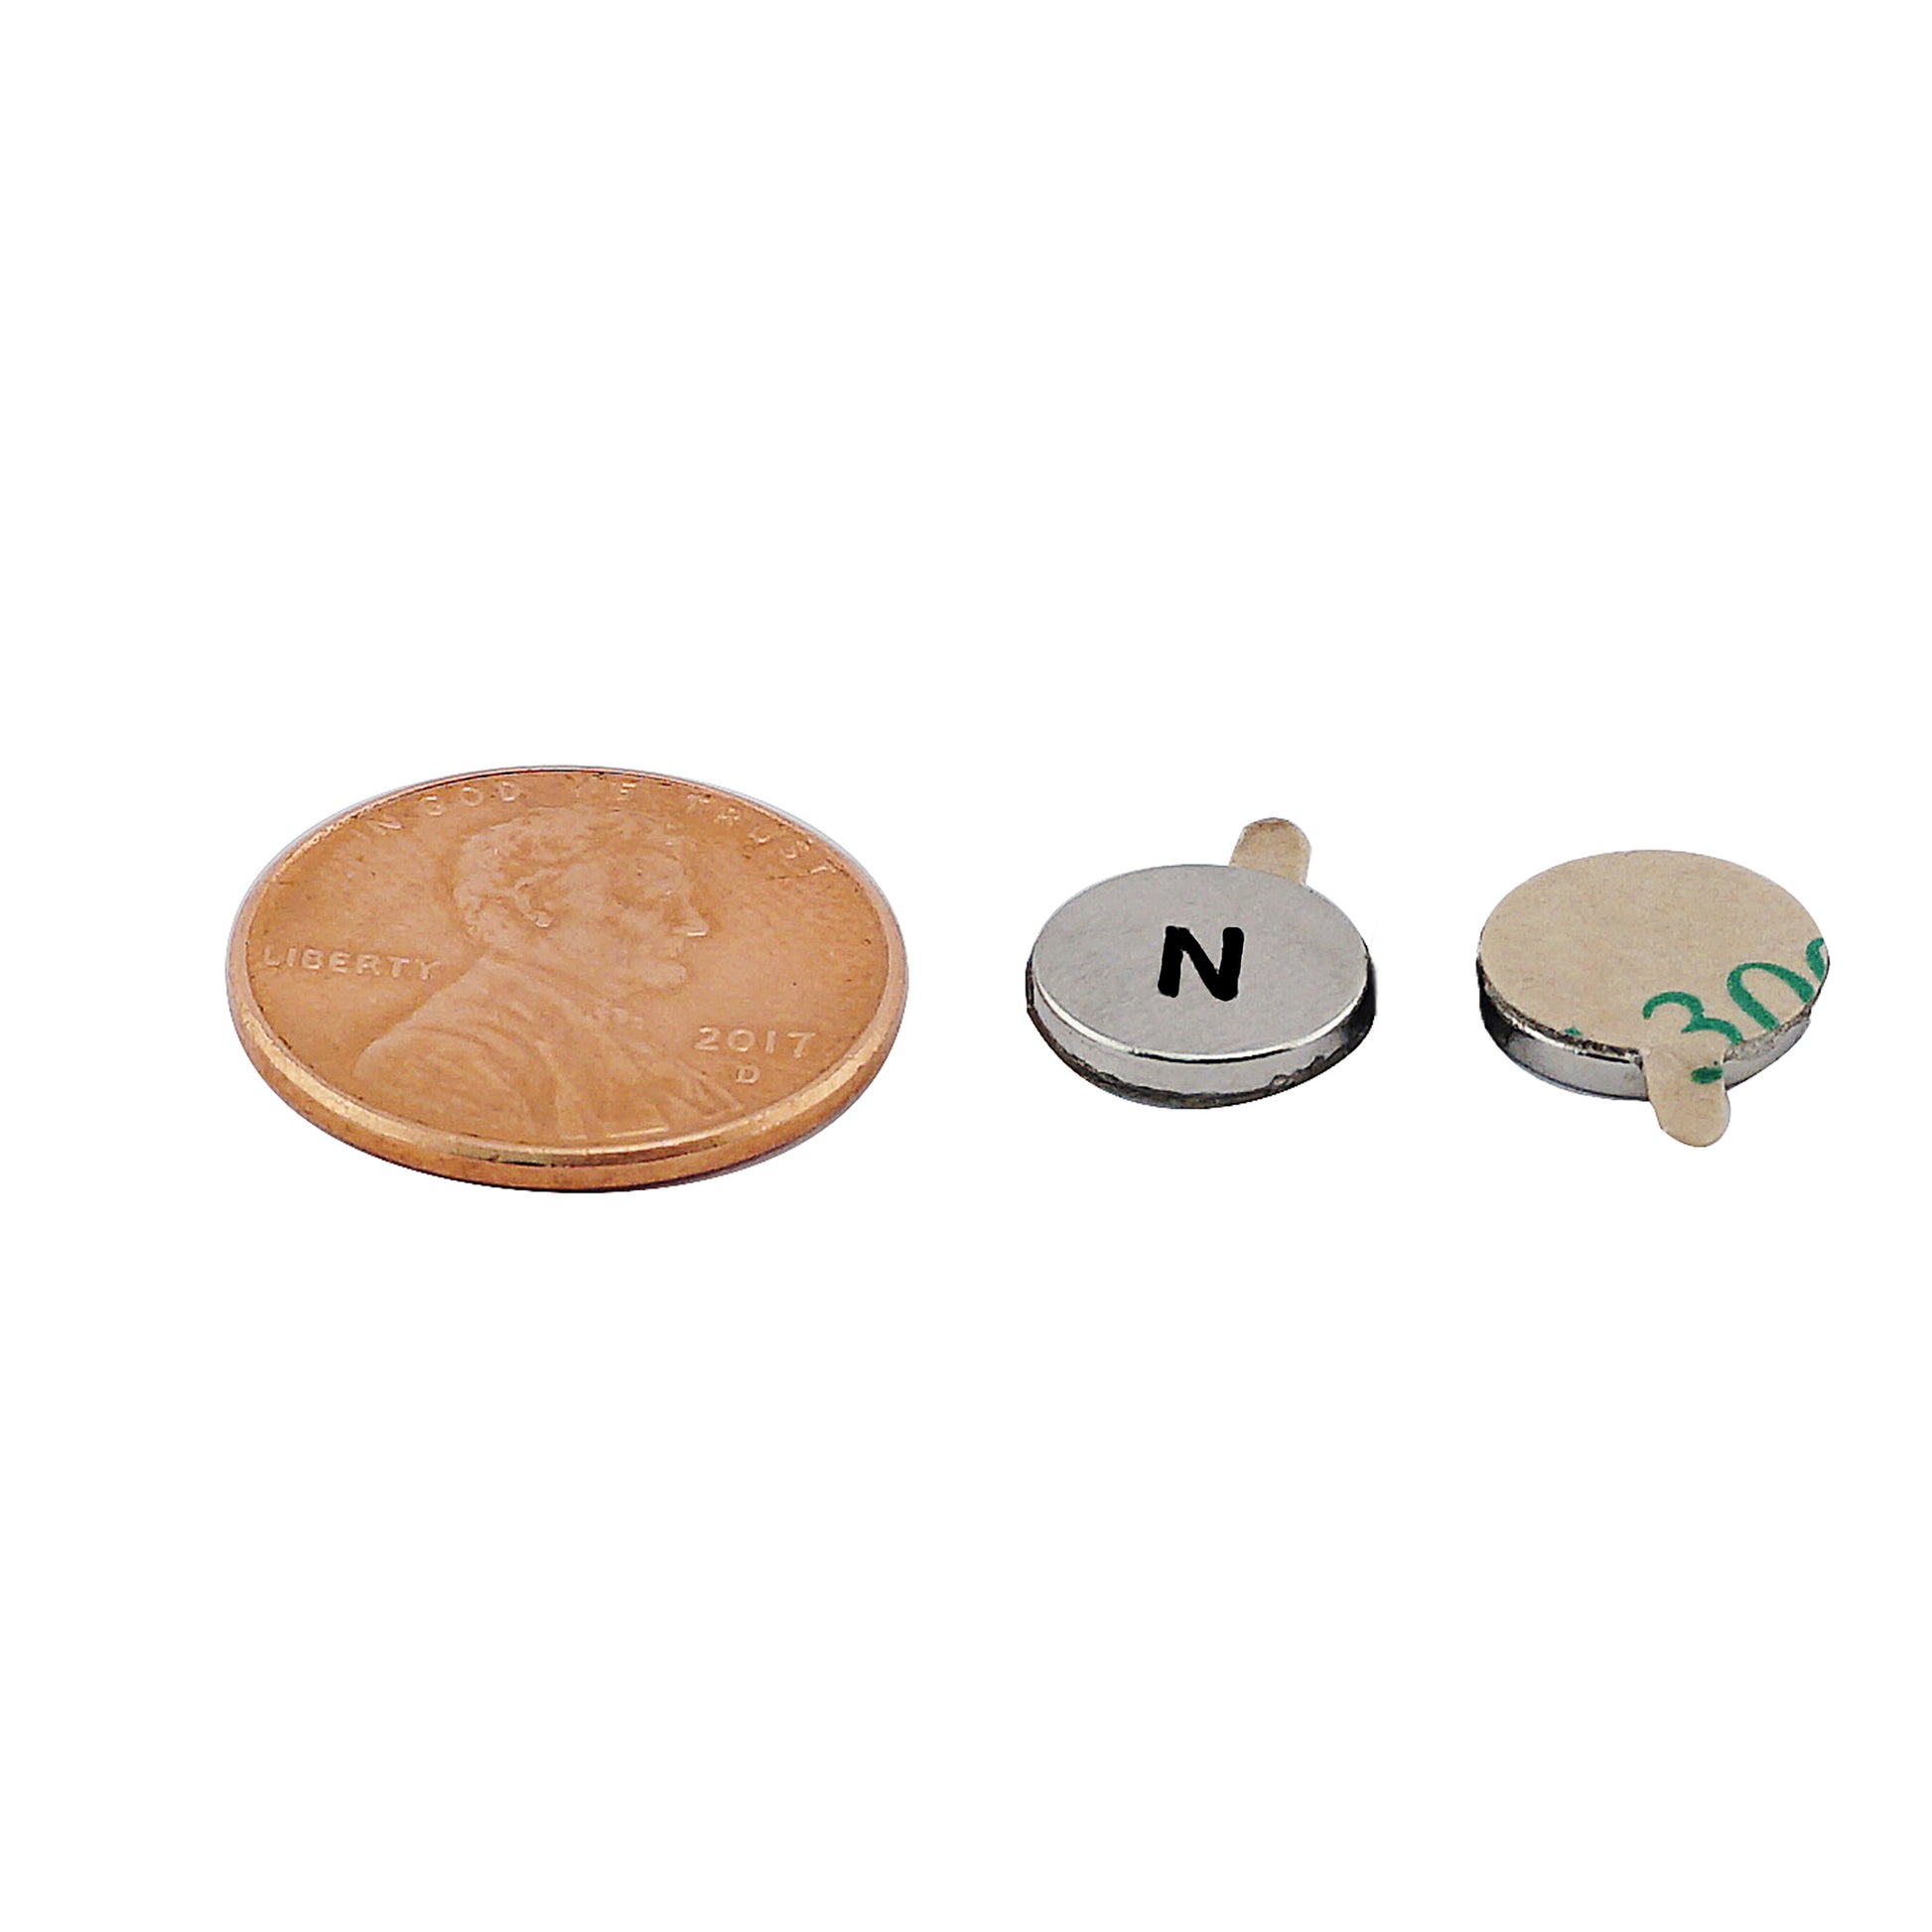 Load image into Gallery viewer, FTND37N Neodymium Disc Magnet with Adhesive - Compared to Penny for Size Reference